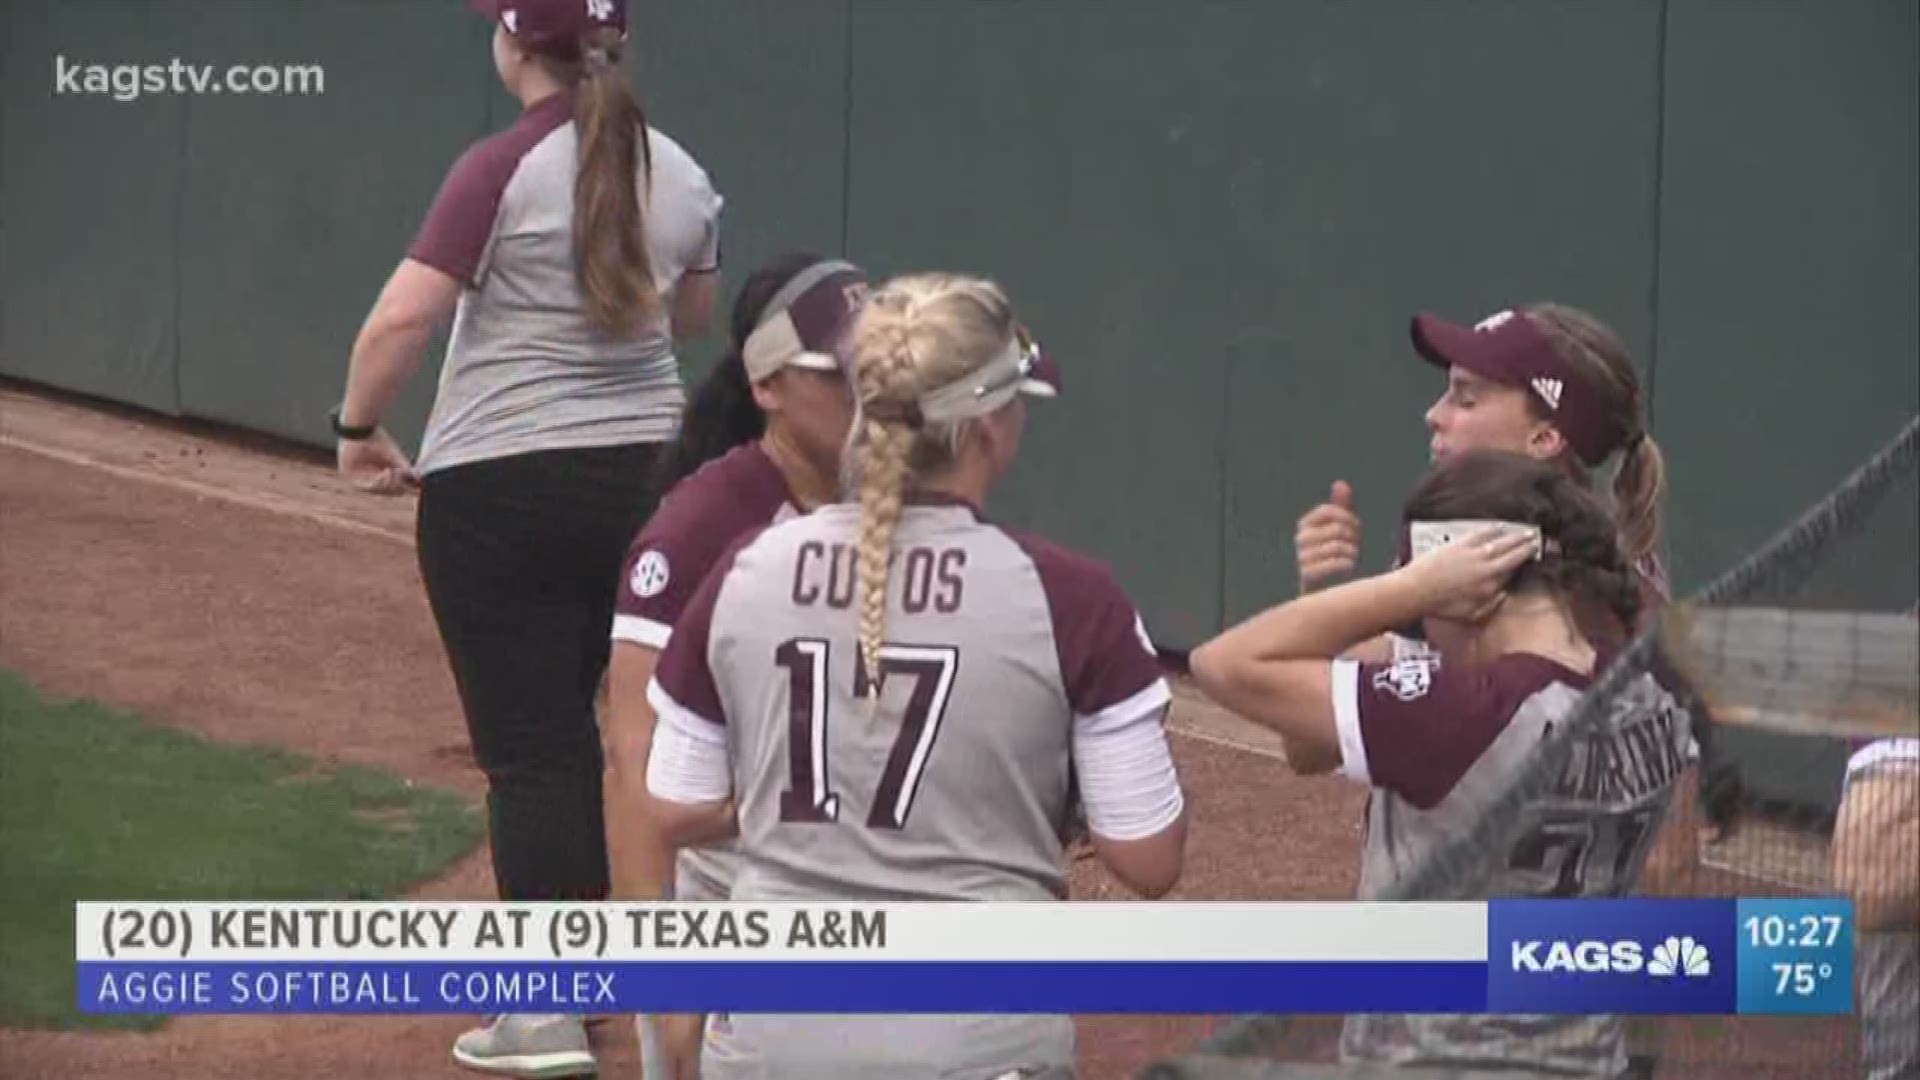 In a matchup of two top 25 teams, A&M had an offensive explosion in the 9-2 victory.